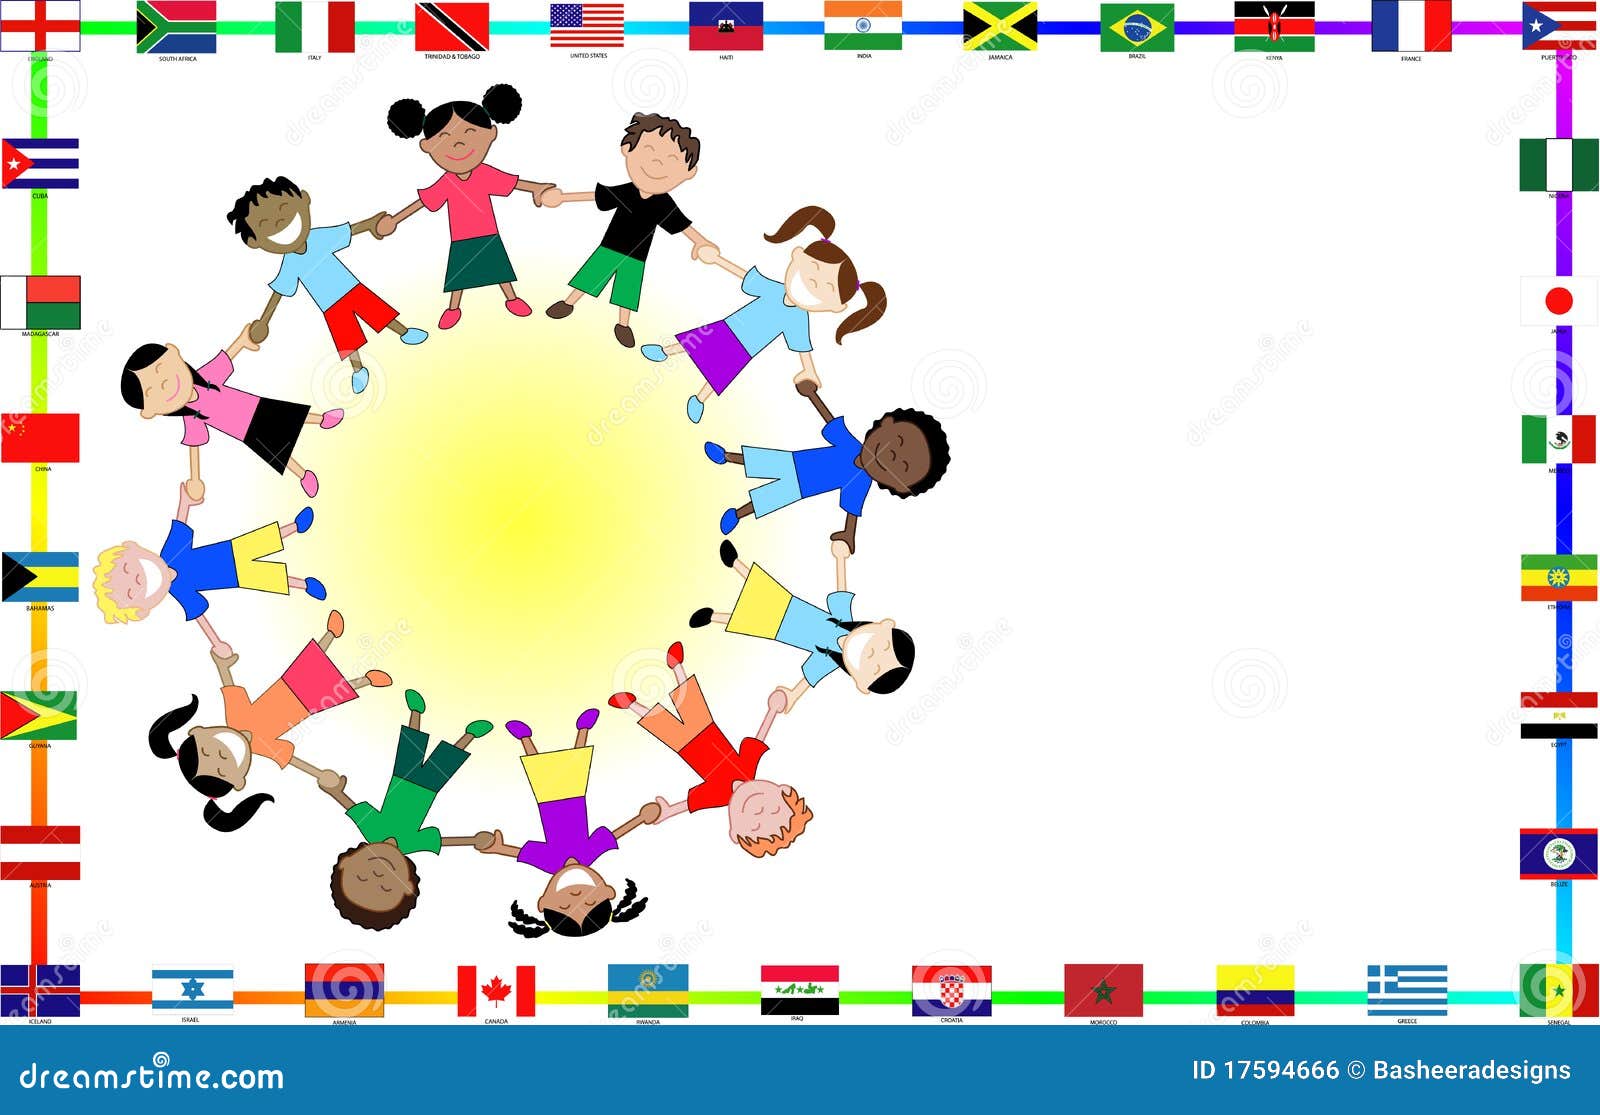 Cultural Kids With Flags Royalty Free Stock Image - Image: 17594666